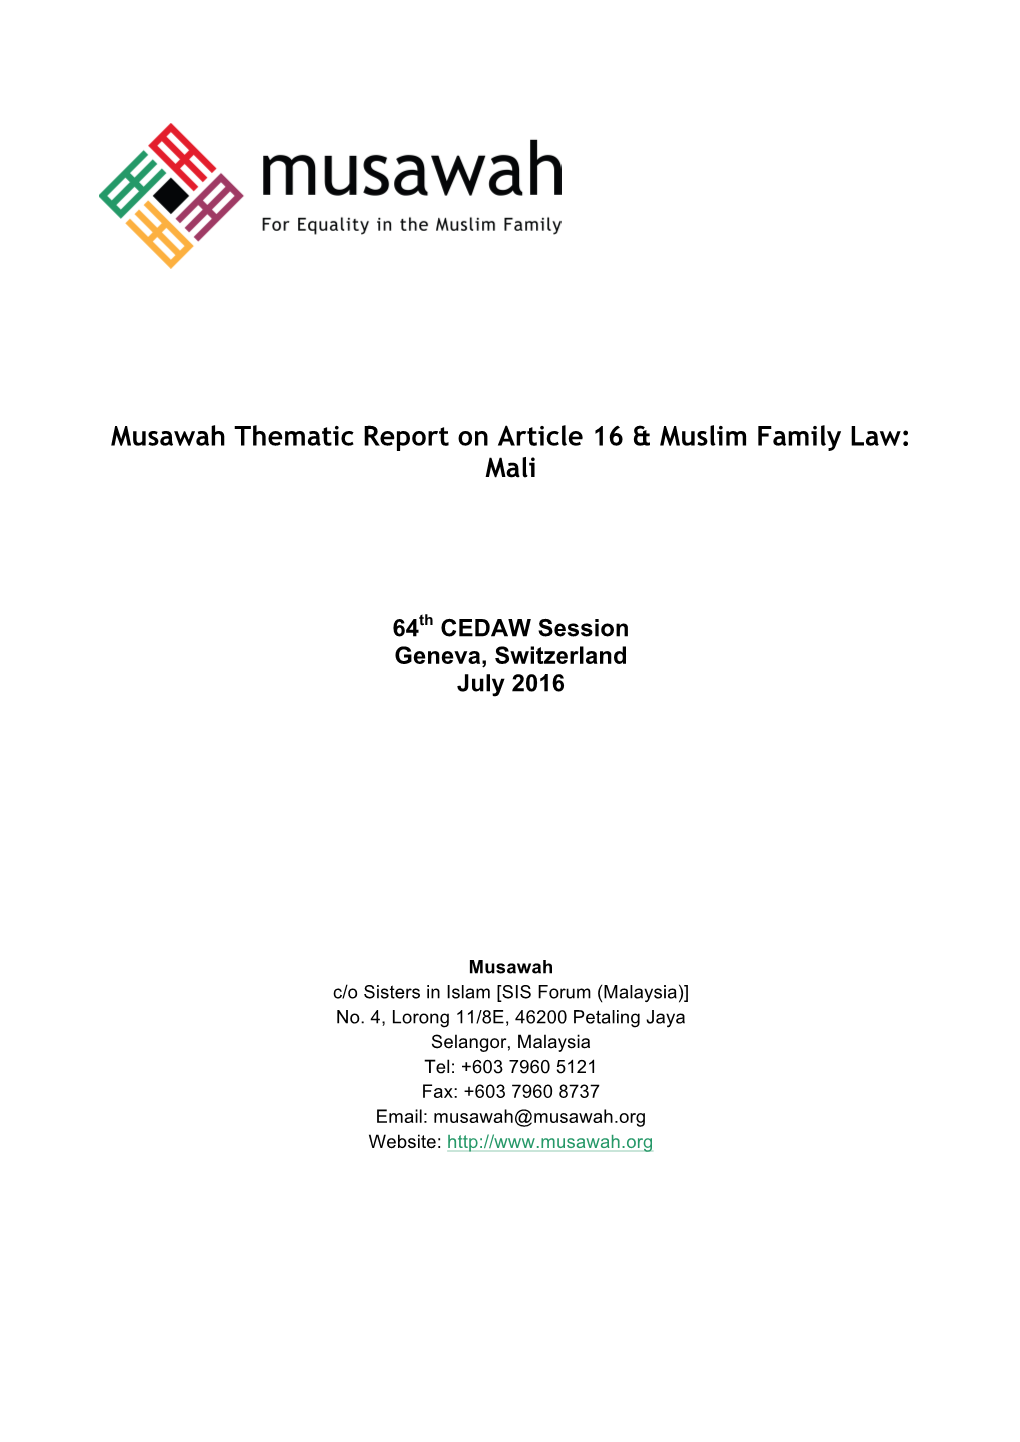 Musawah Thematic Report on Article 16 & Muslim Family Law: Mali